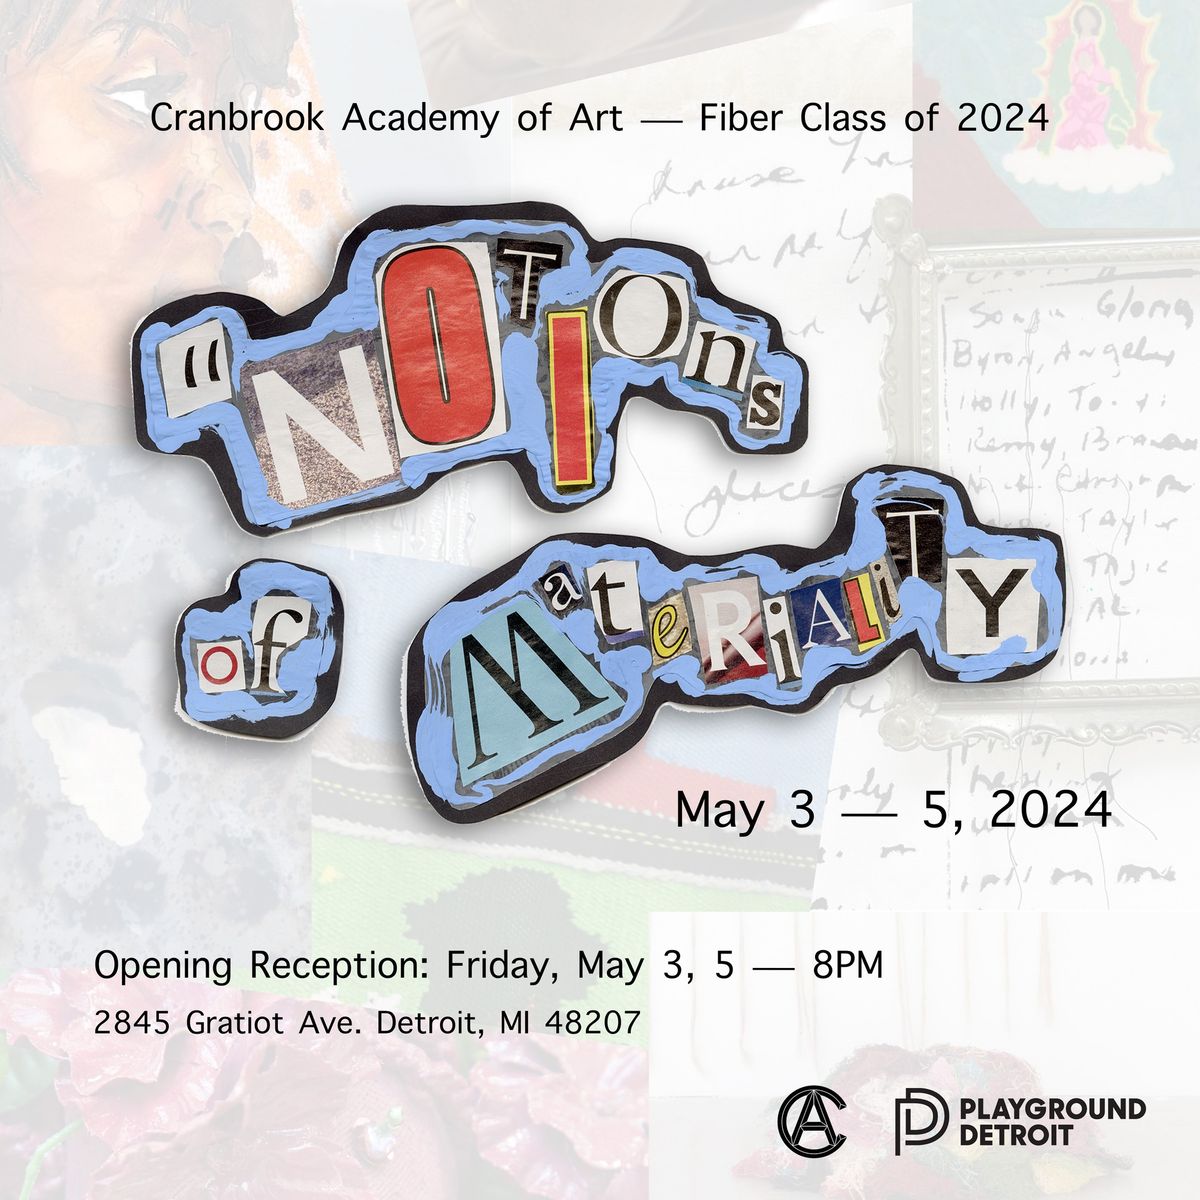 "Notions of Materiality" Cranbrook Academy of Art Fiber Class of 2024 Exhibition